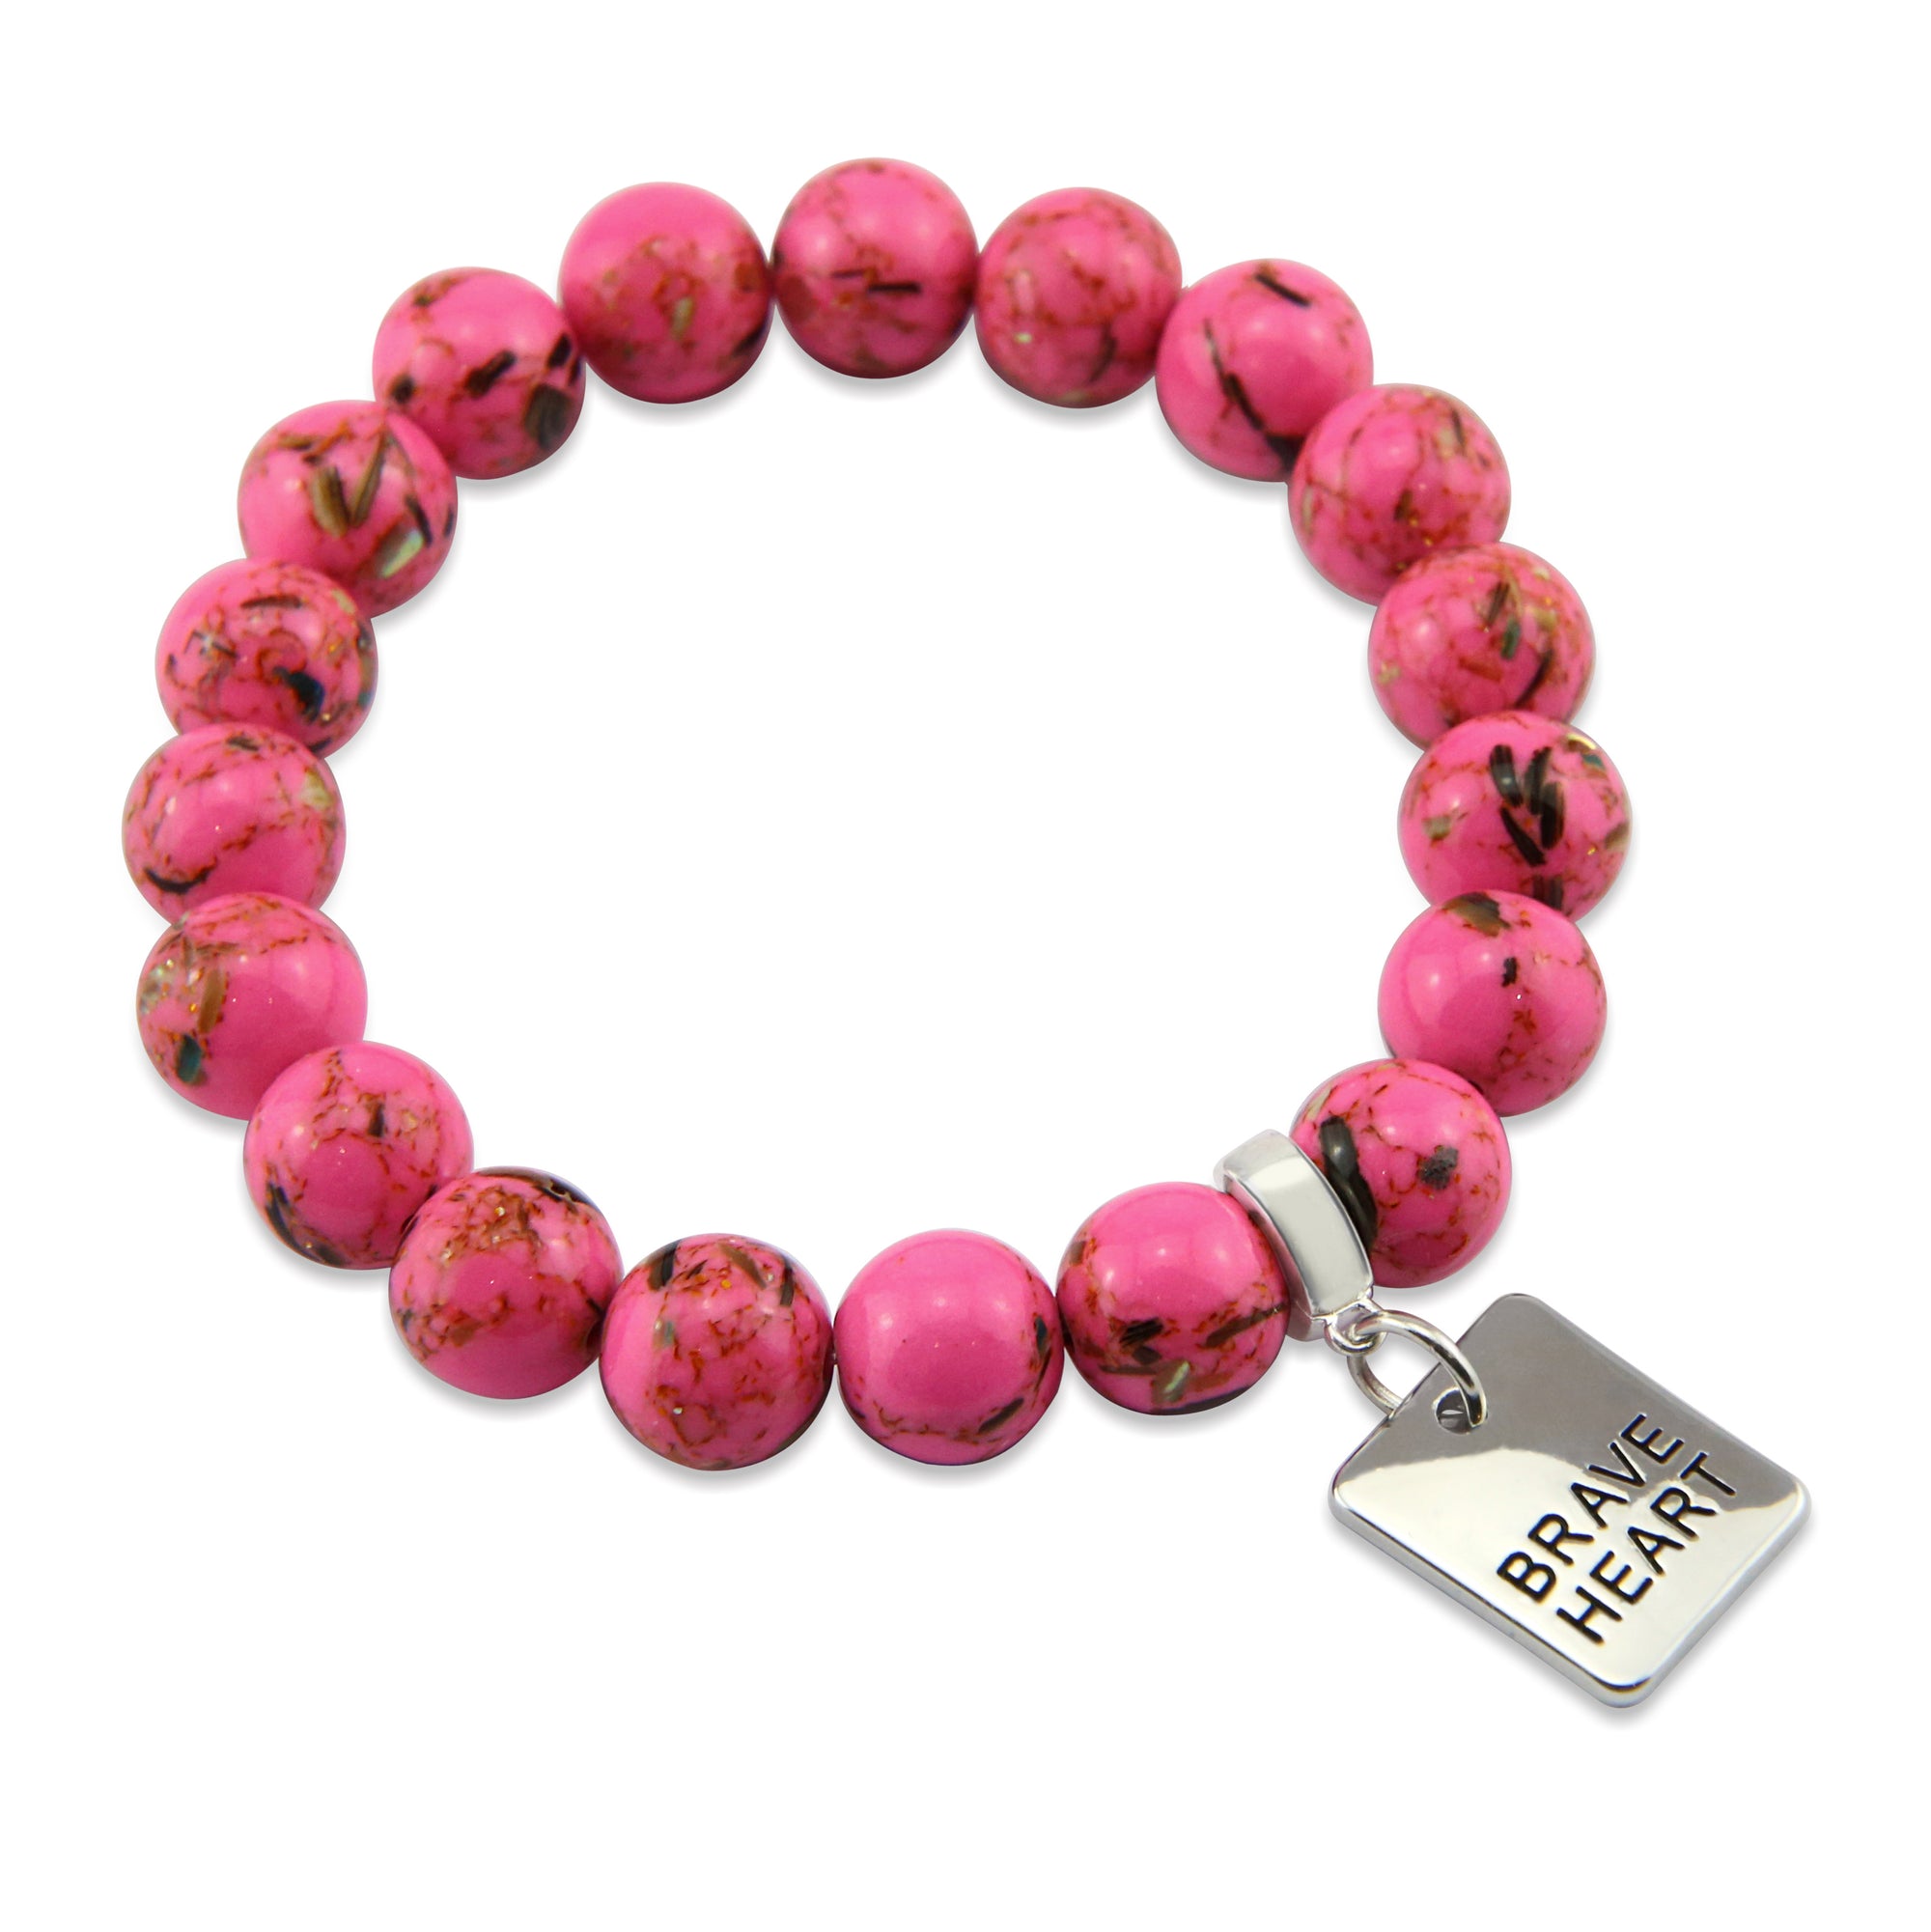 Hot Pink Synthesis Stone 10mm Bead Bracelet with Brave Heart Silver Word Charm. Fundraiser for the National Breast Cancer Foundation